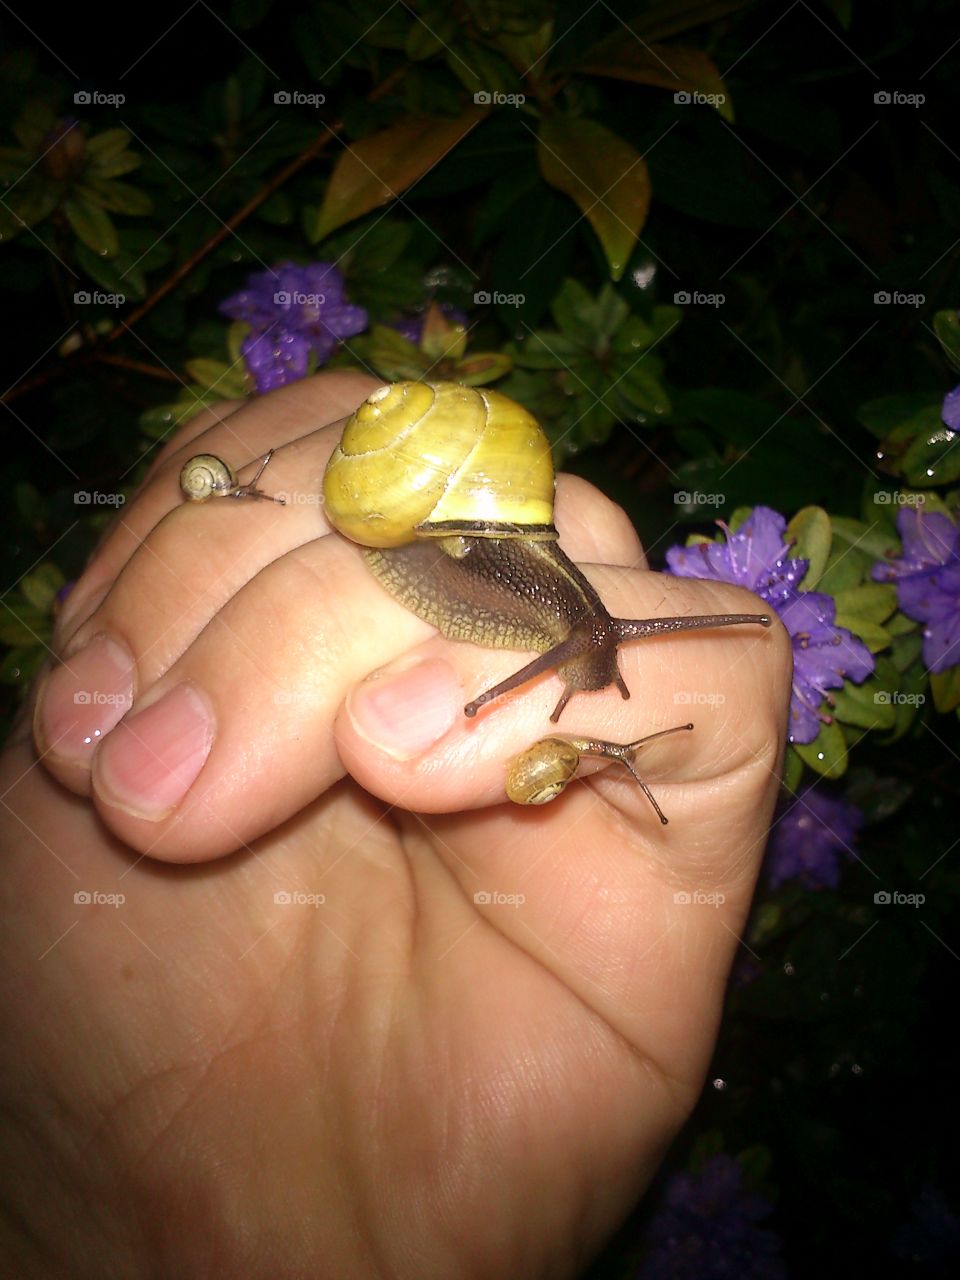 Small snail on the hand